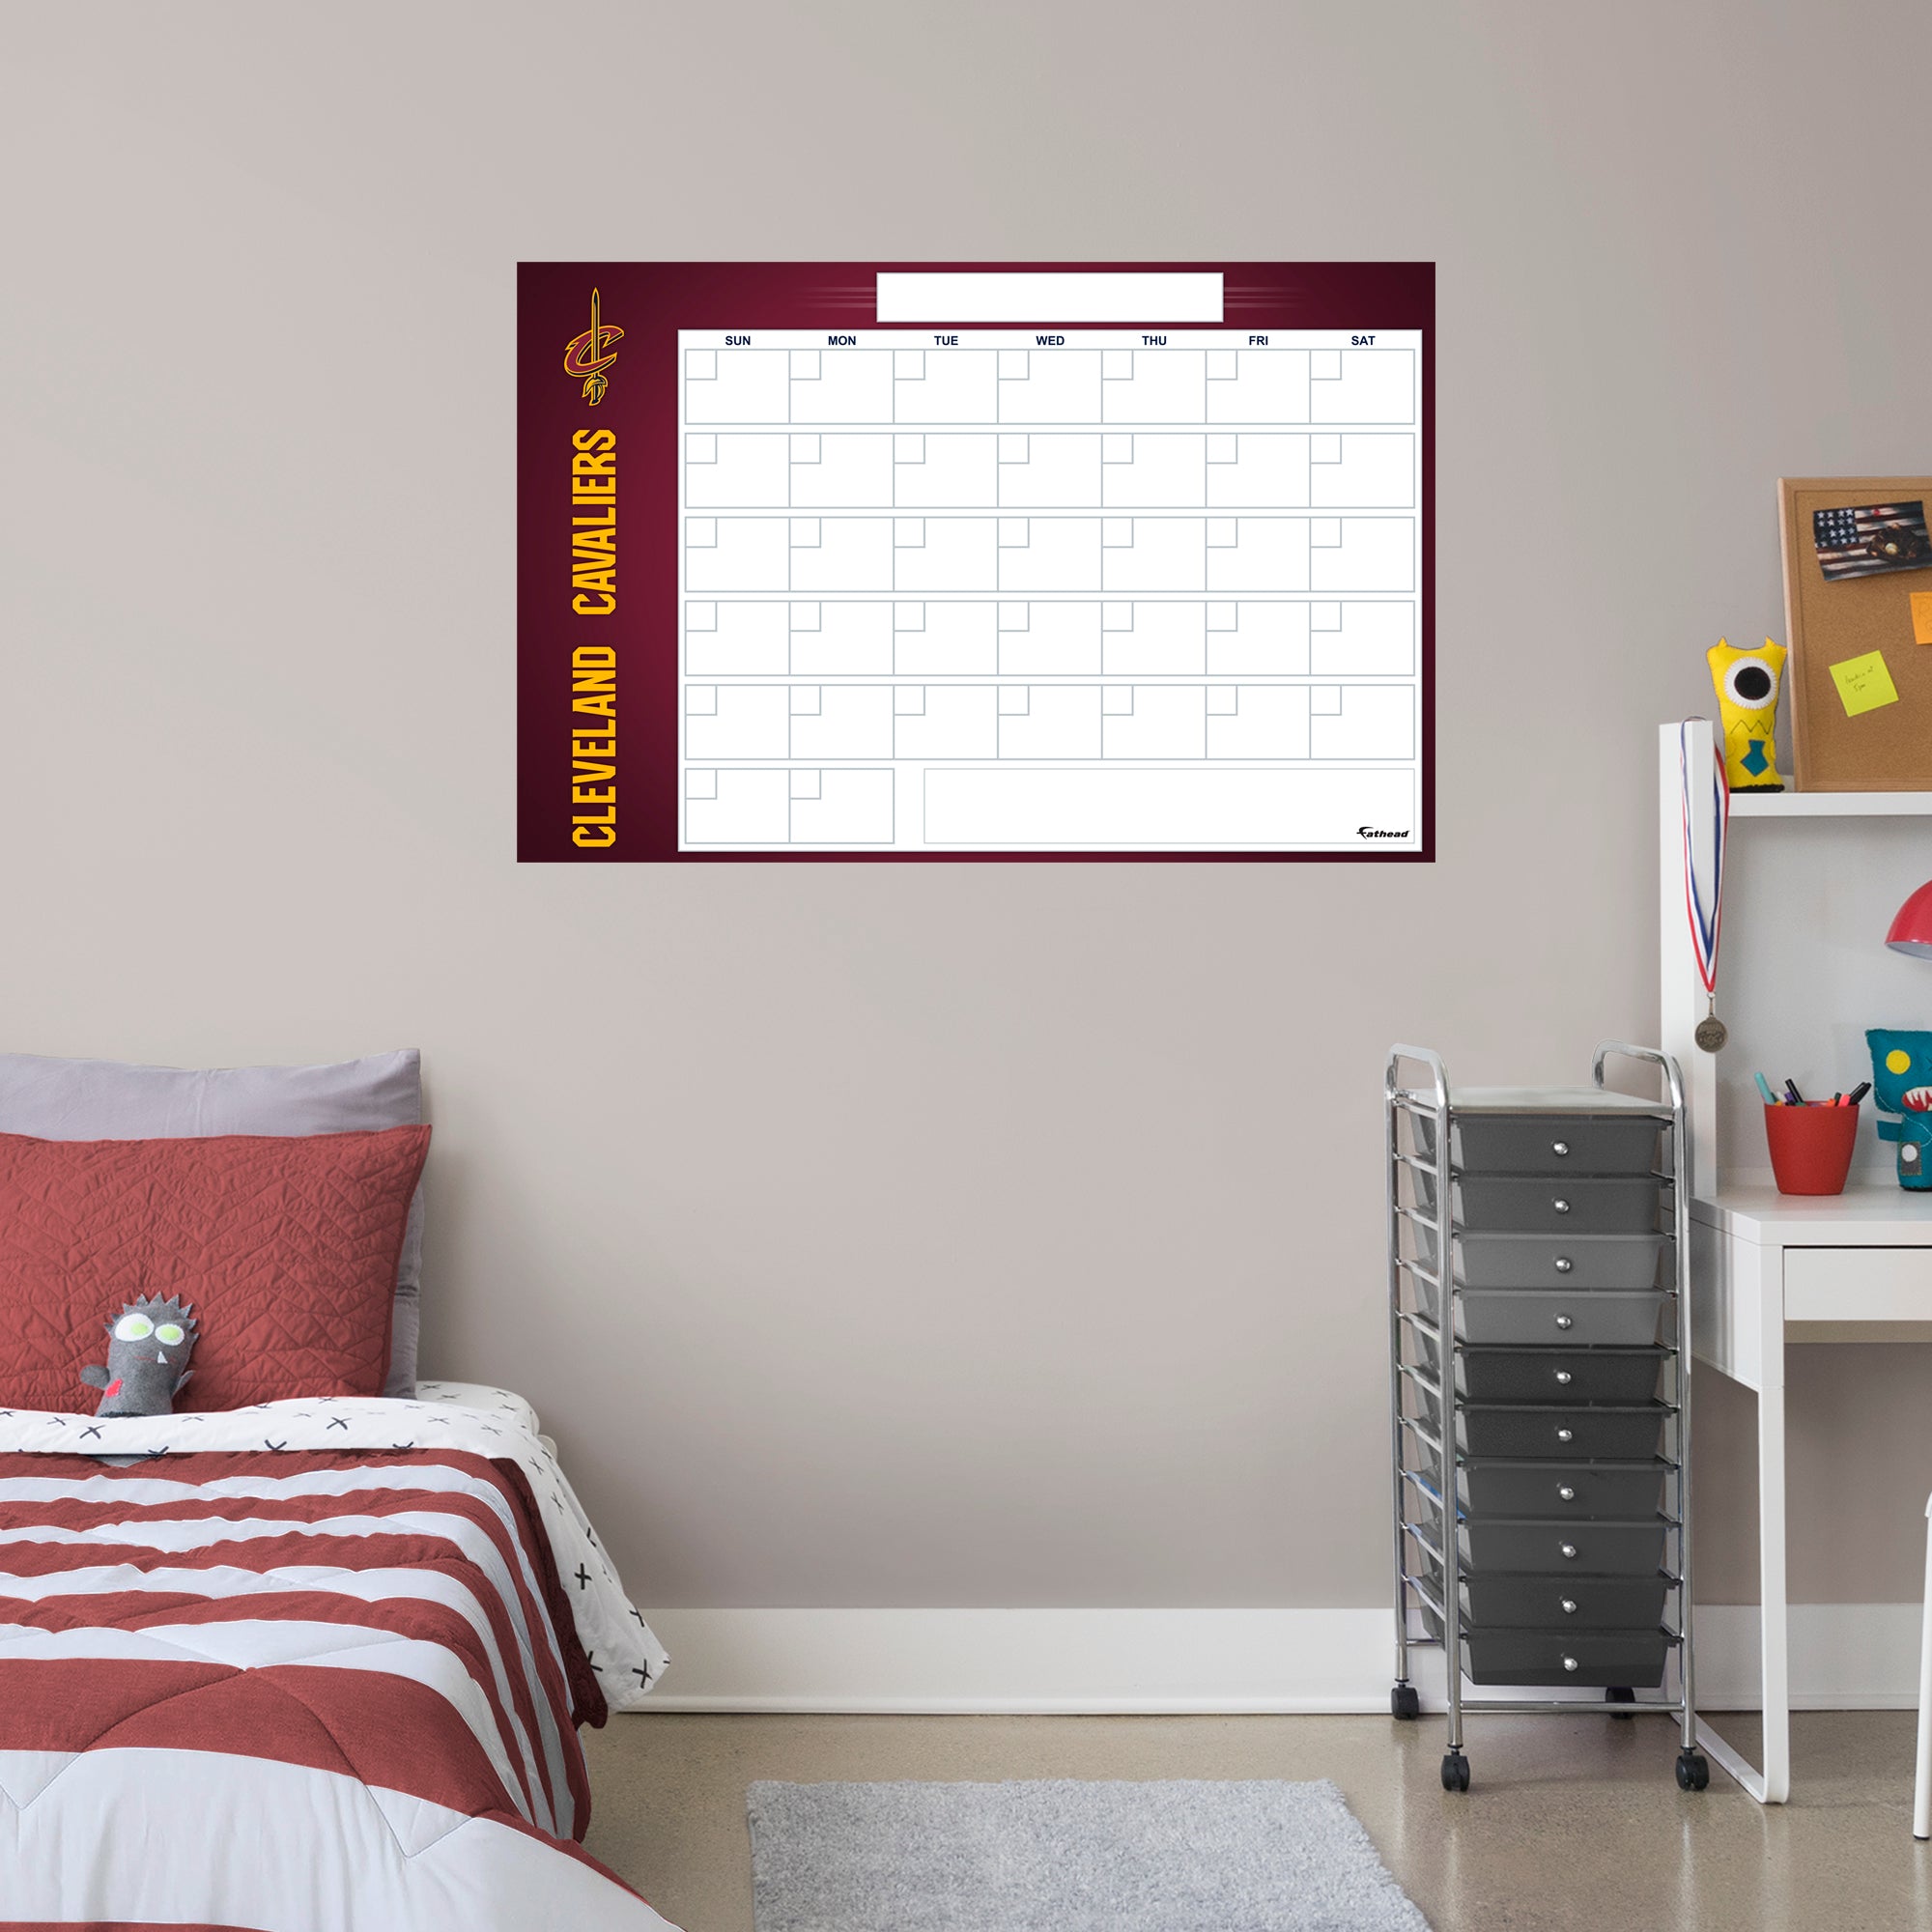 Cleveland Cavaliers Dry Erase Calendar - Officially Licensed NBA Removable Wall Decal Giant Decal (34"W x 52"H) by Fathead | Vin